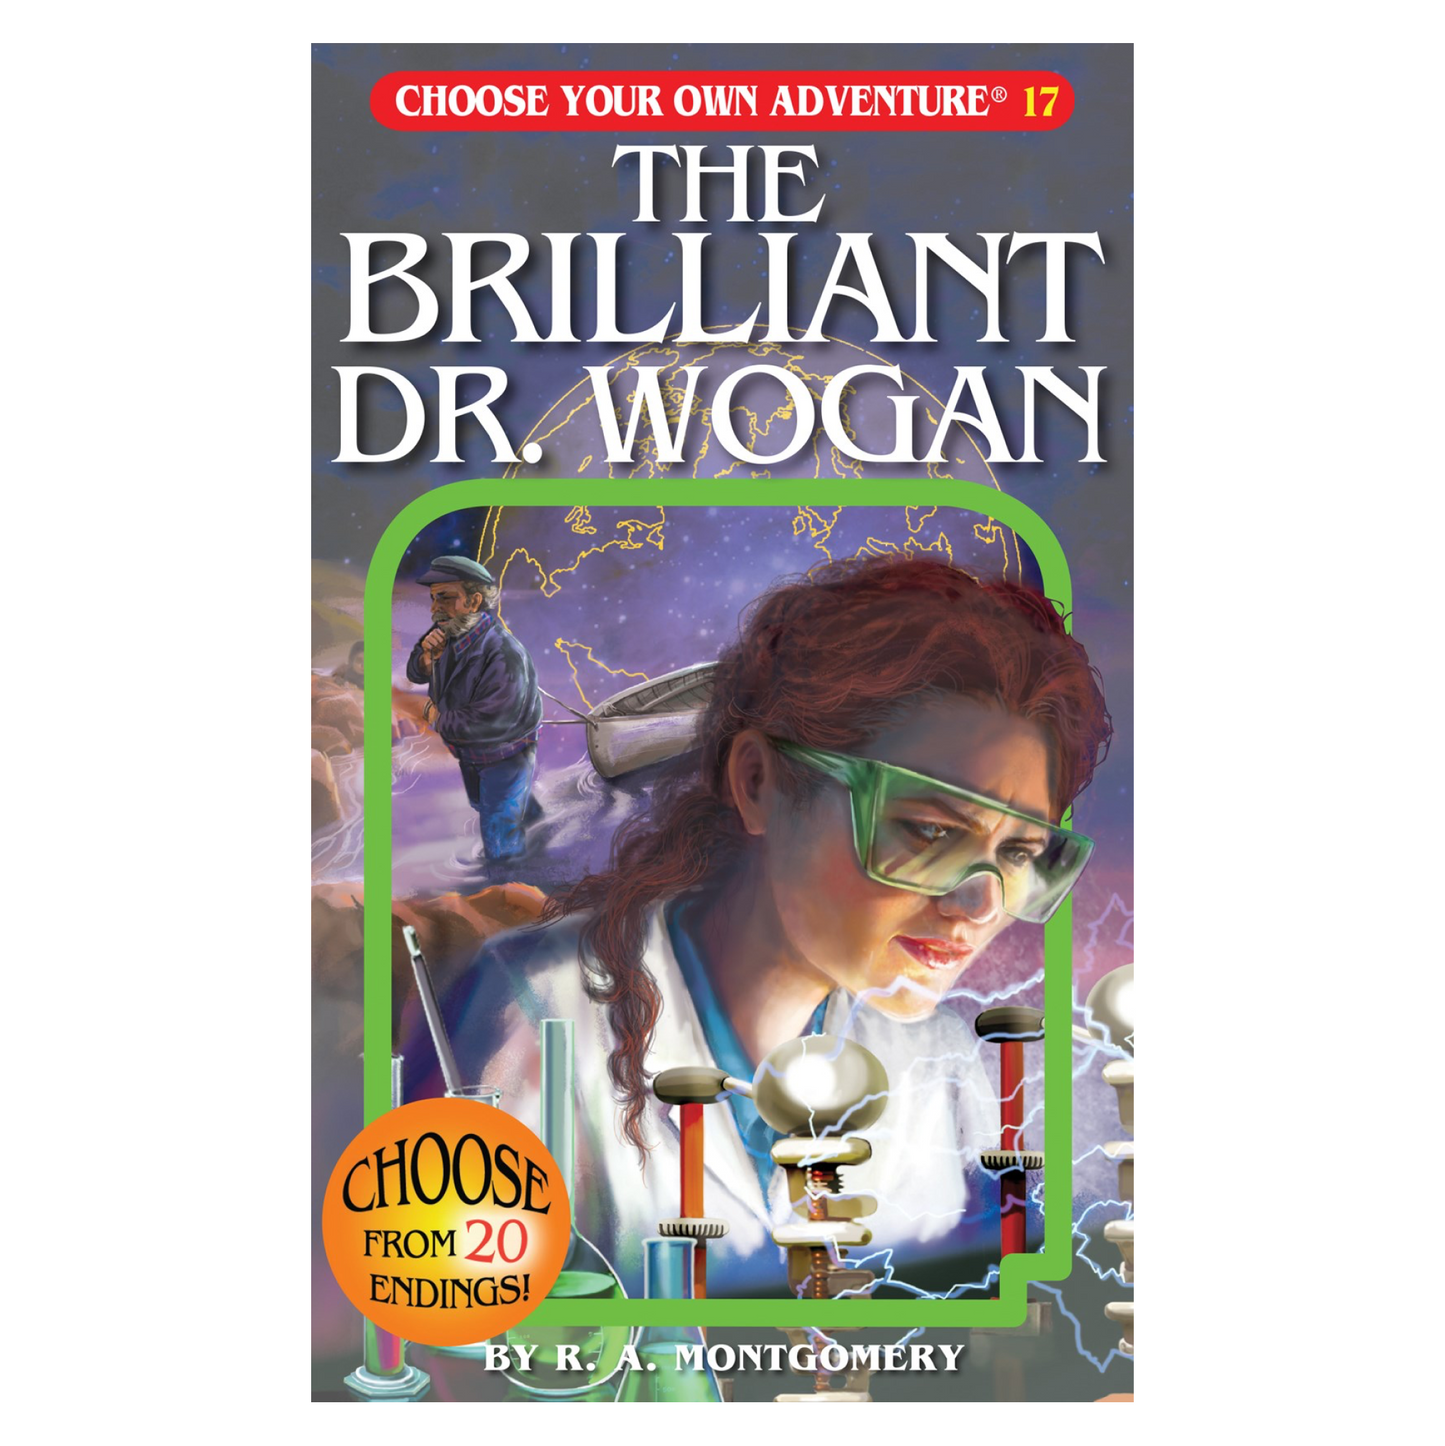 Choose Your Own Adventure: The Brilliant Dr. Wogan